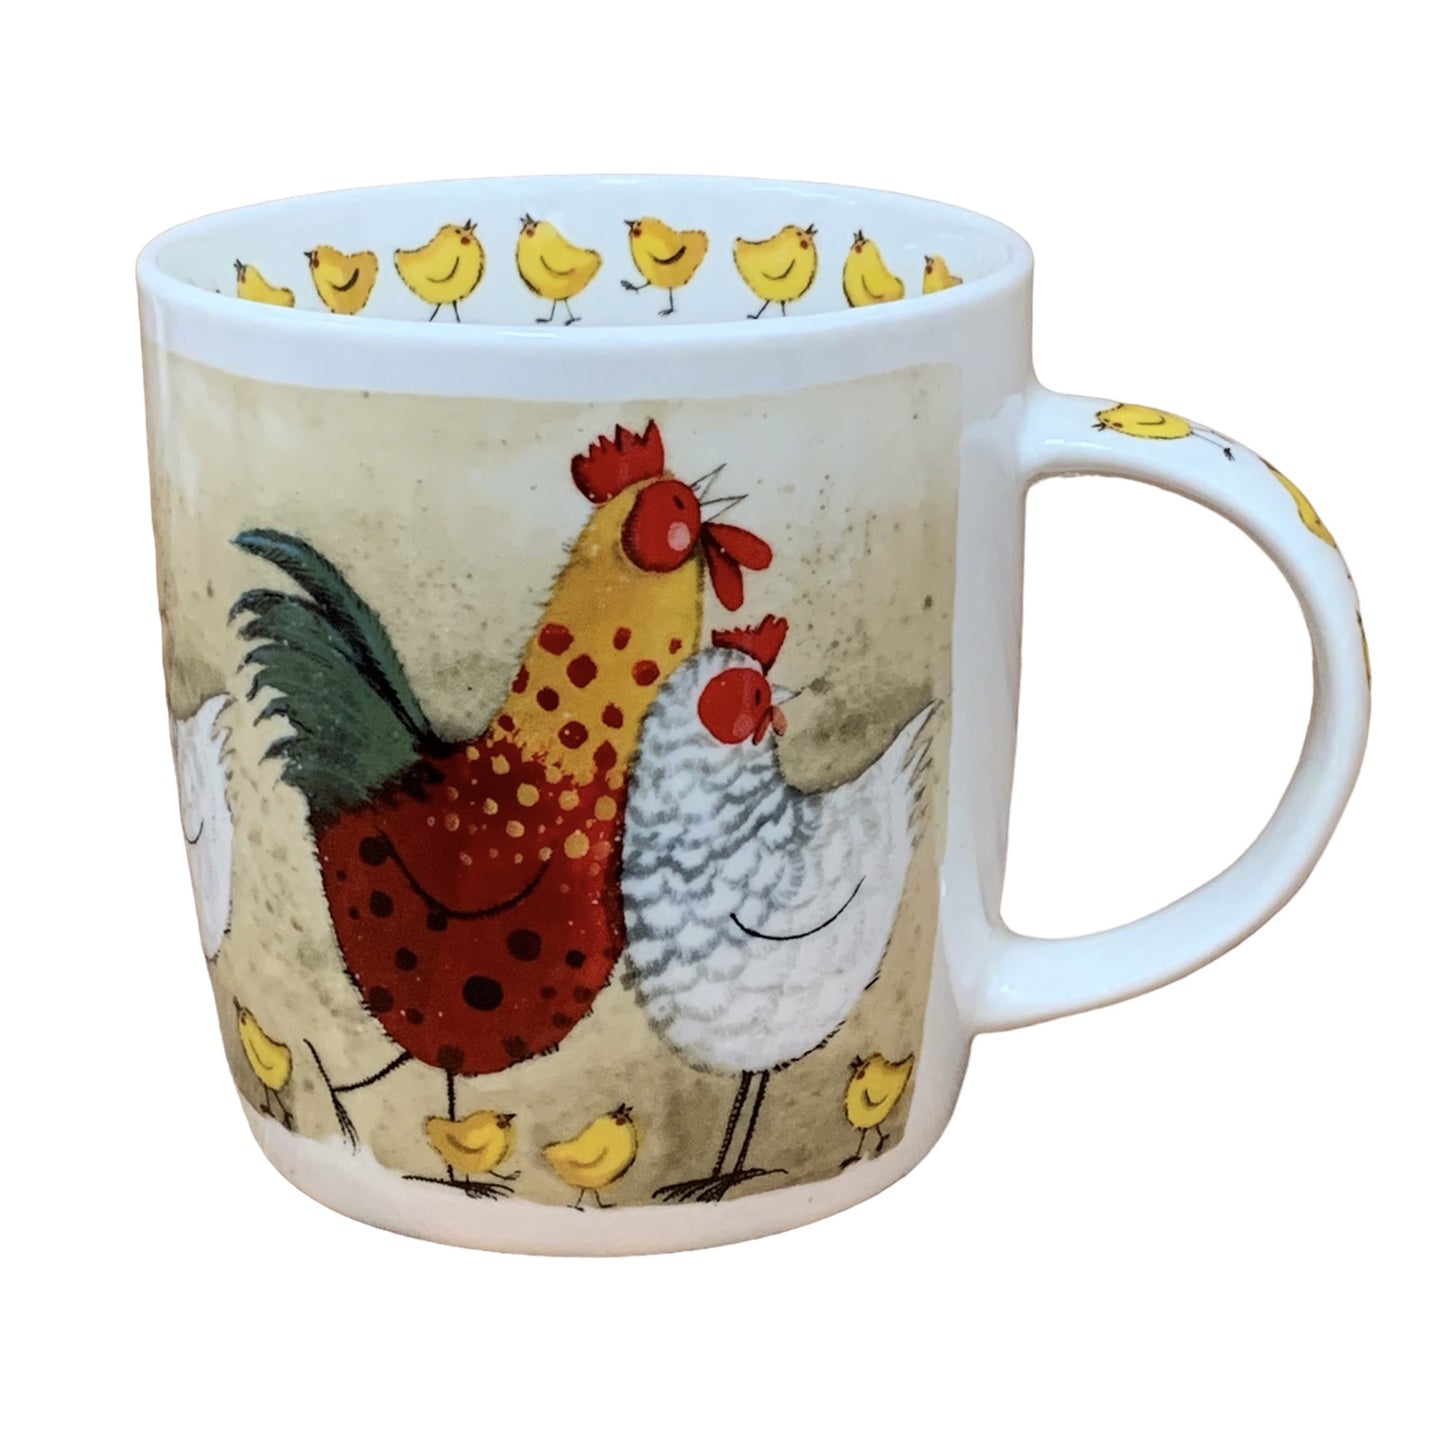 Alex Clark mug is illustrated with a chicken called Rose & a cockerel called Rodney who are in their Pen with their little chicks. This mug also features little chick illustrations around the inside rim & down the handle. 